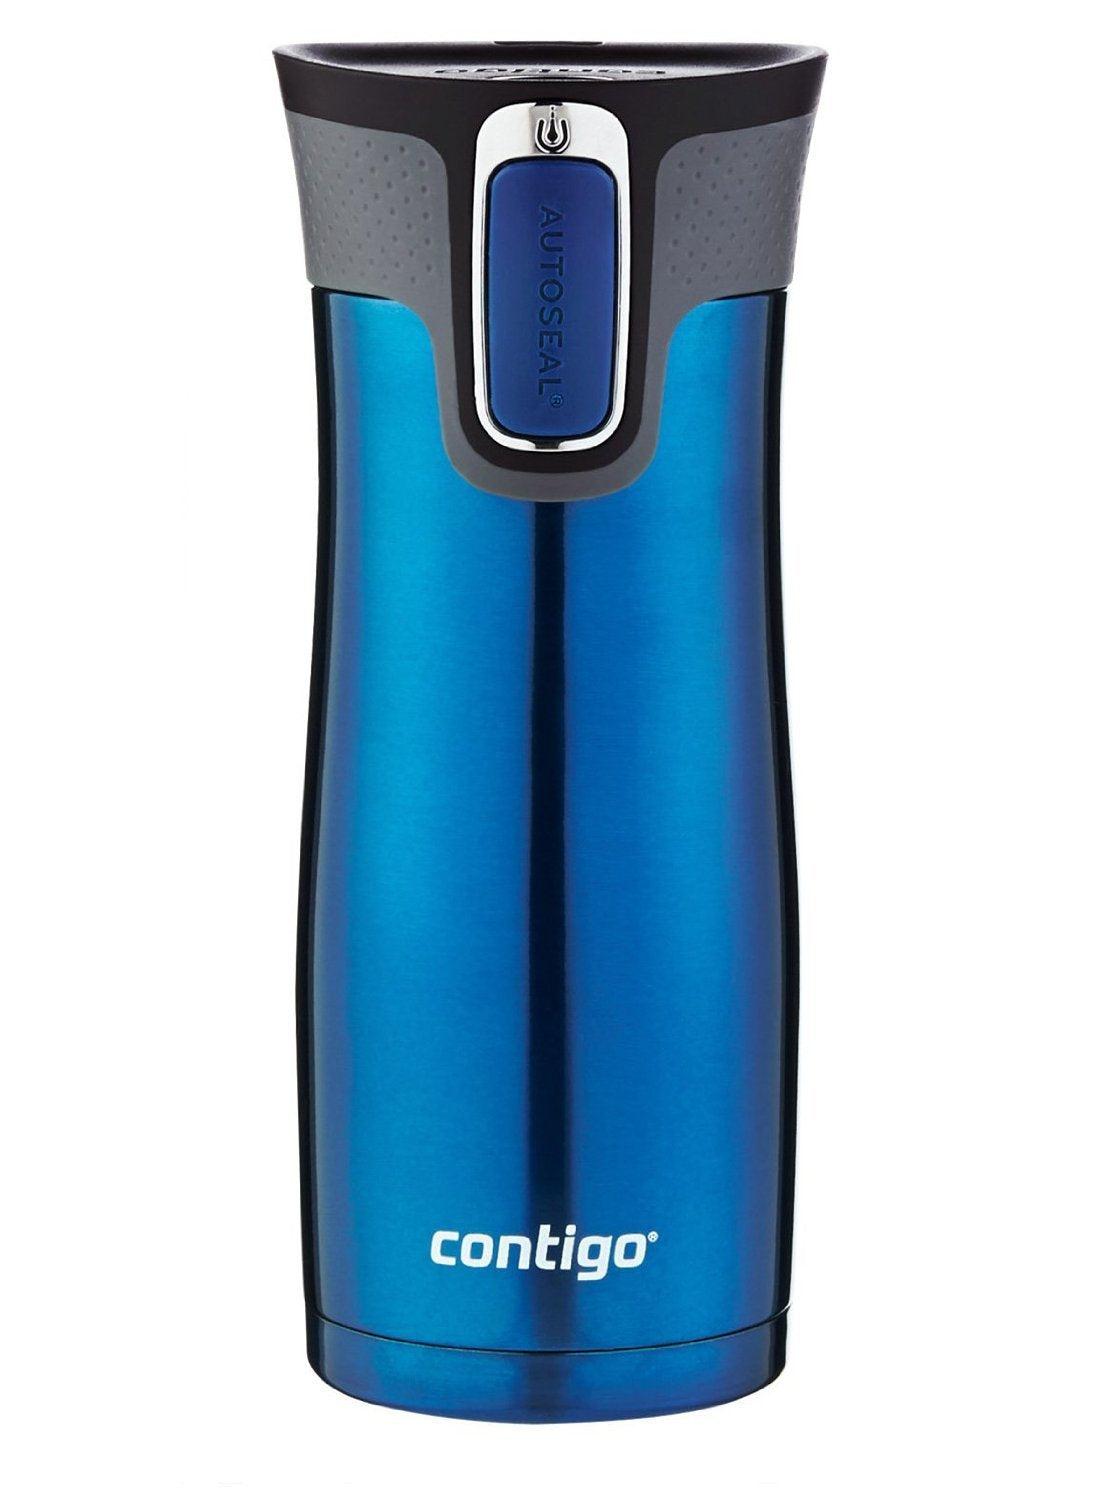 Contigo Fit AUTOSEAL Stainless Steel Insulated Water Bottle Blue